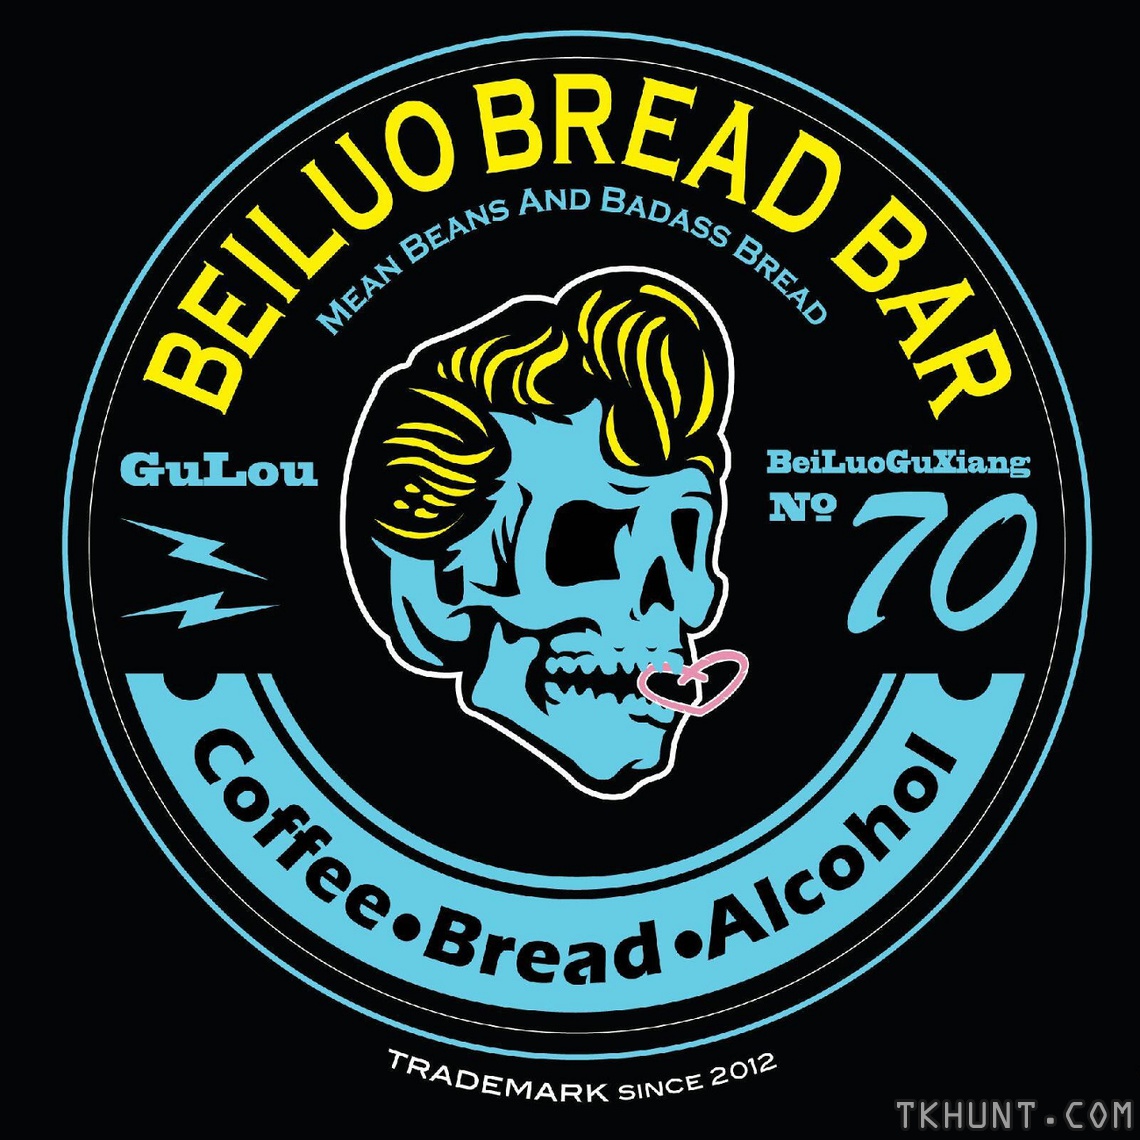 Free Booze Tonight at Beiluo Bread Bar Before They Close Their Doors Forever